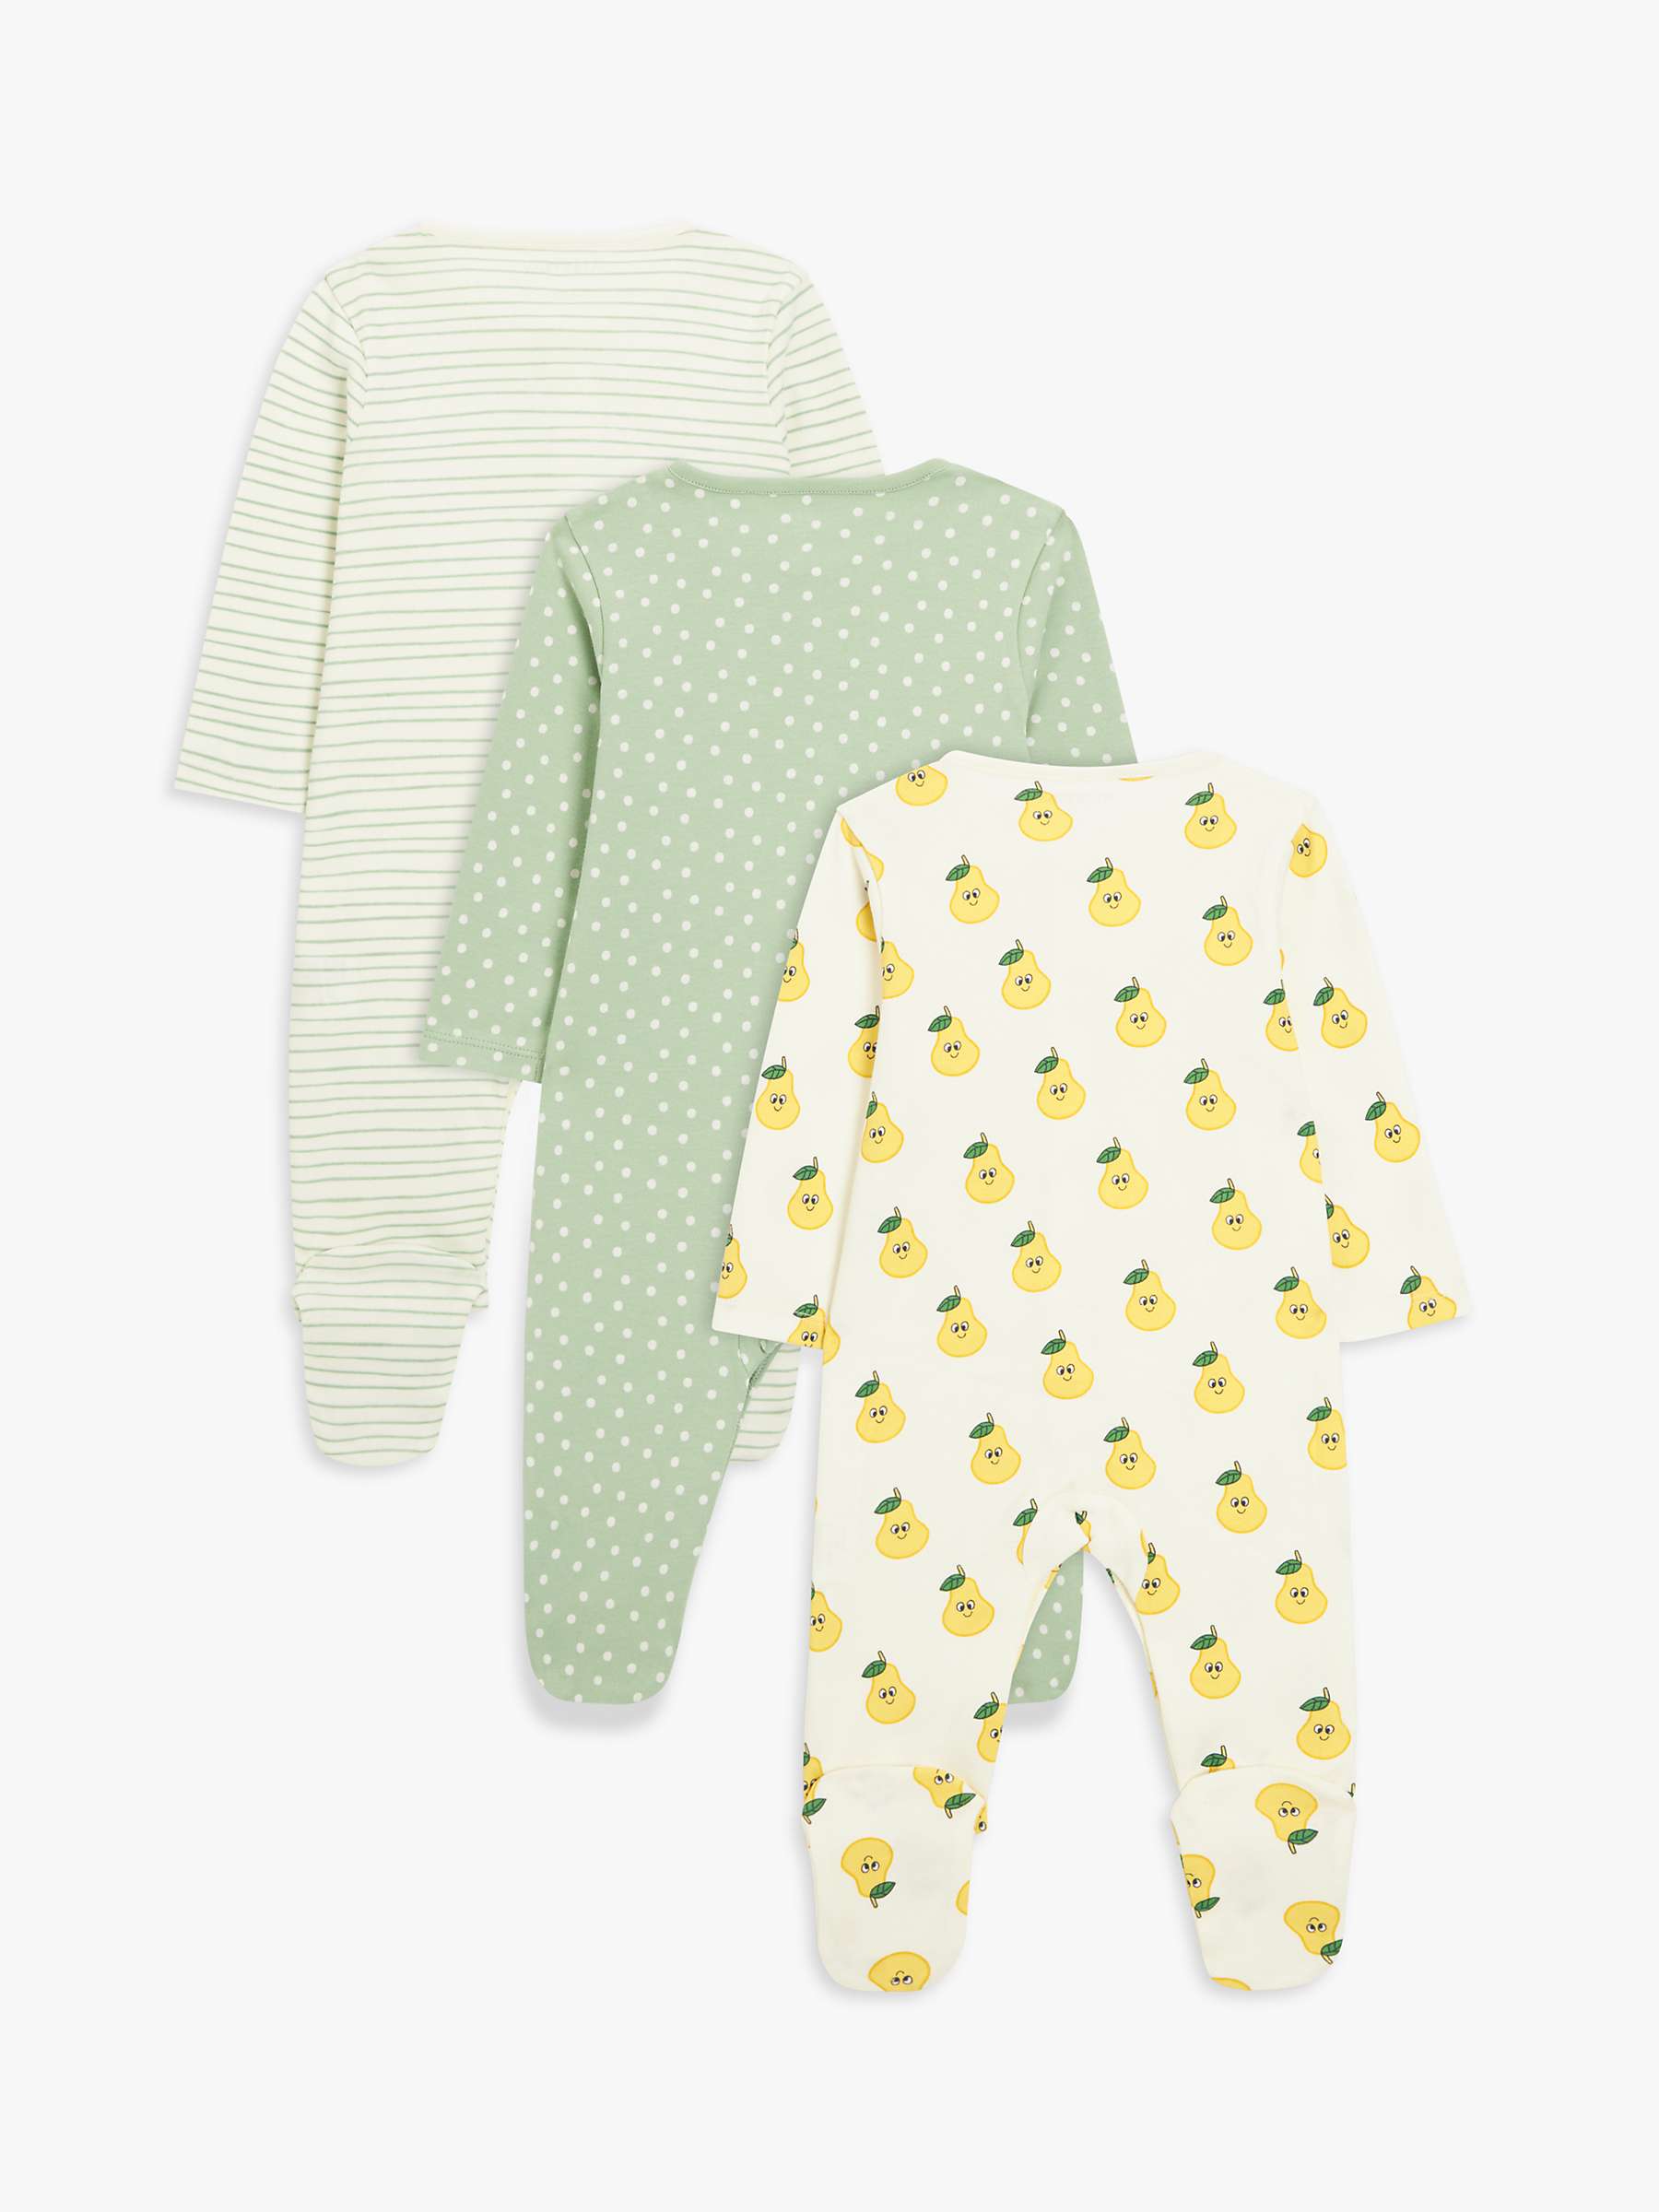 Buy John Lewis ANYDAY Baby Pear Mix Sleepsuit, Pack of 3, Multi Online at johnlewis.com